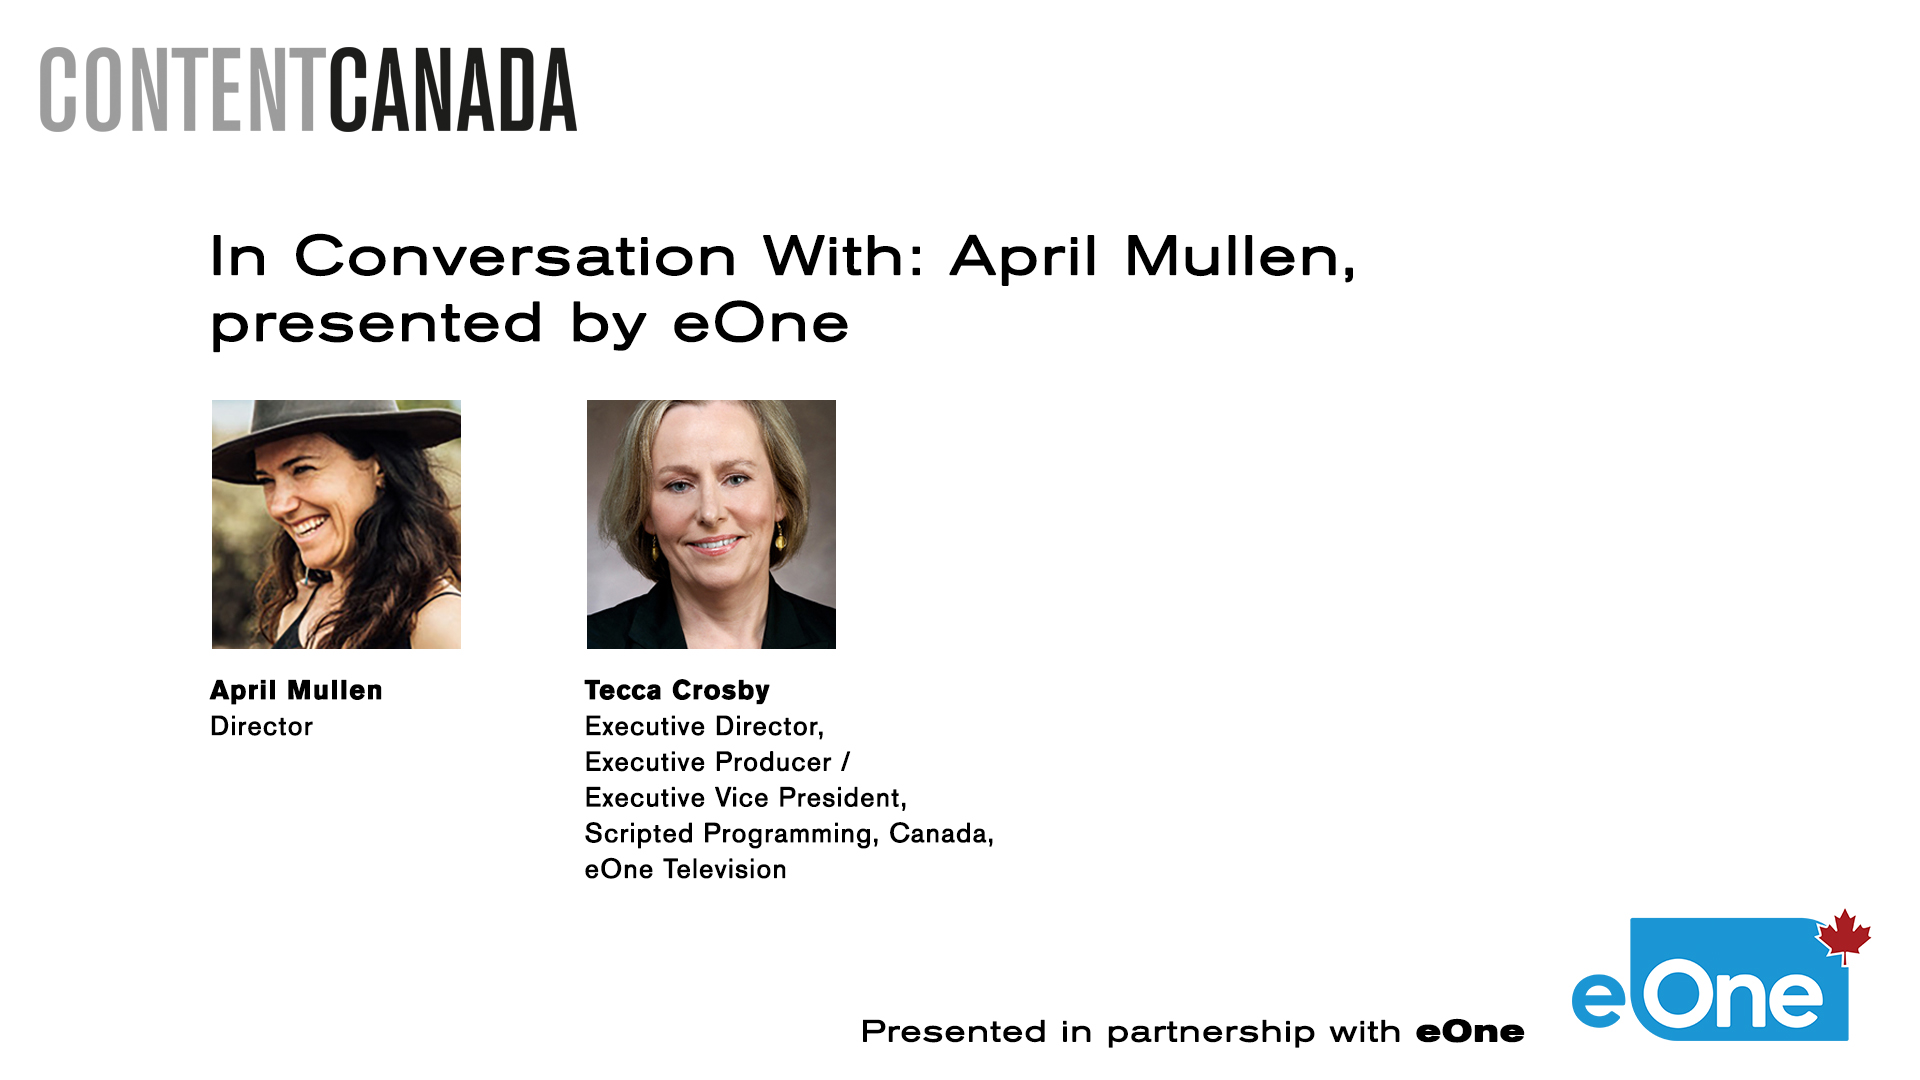 In Conversation With: April Mullen, presented by eOne